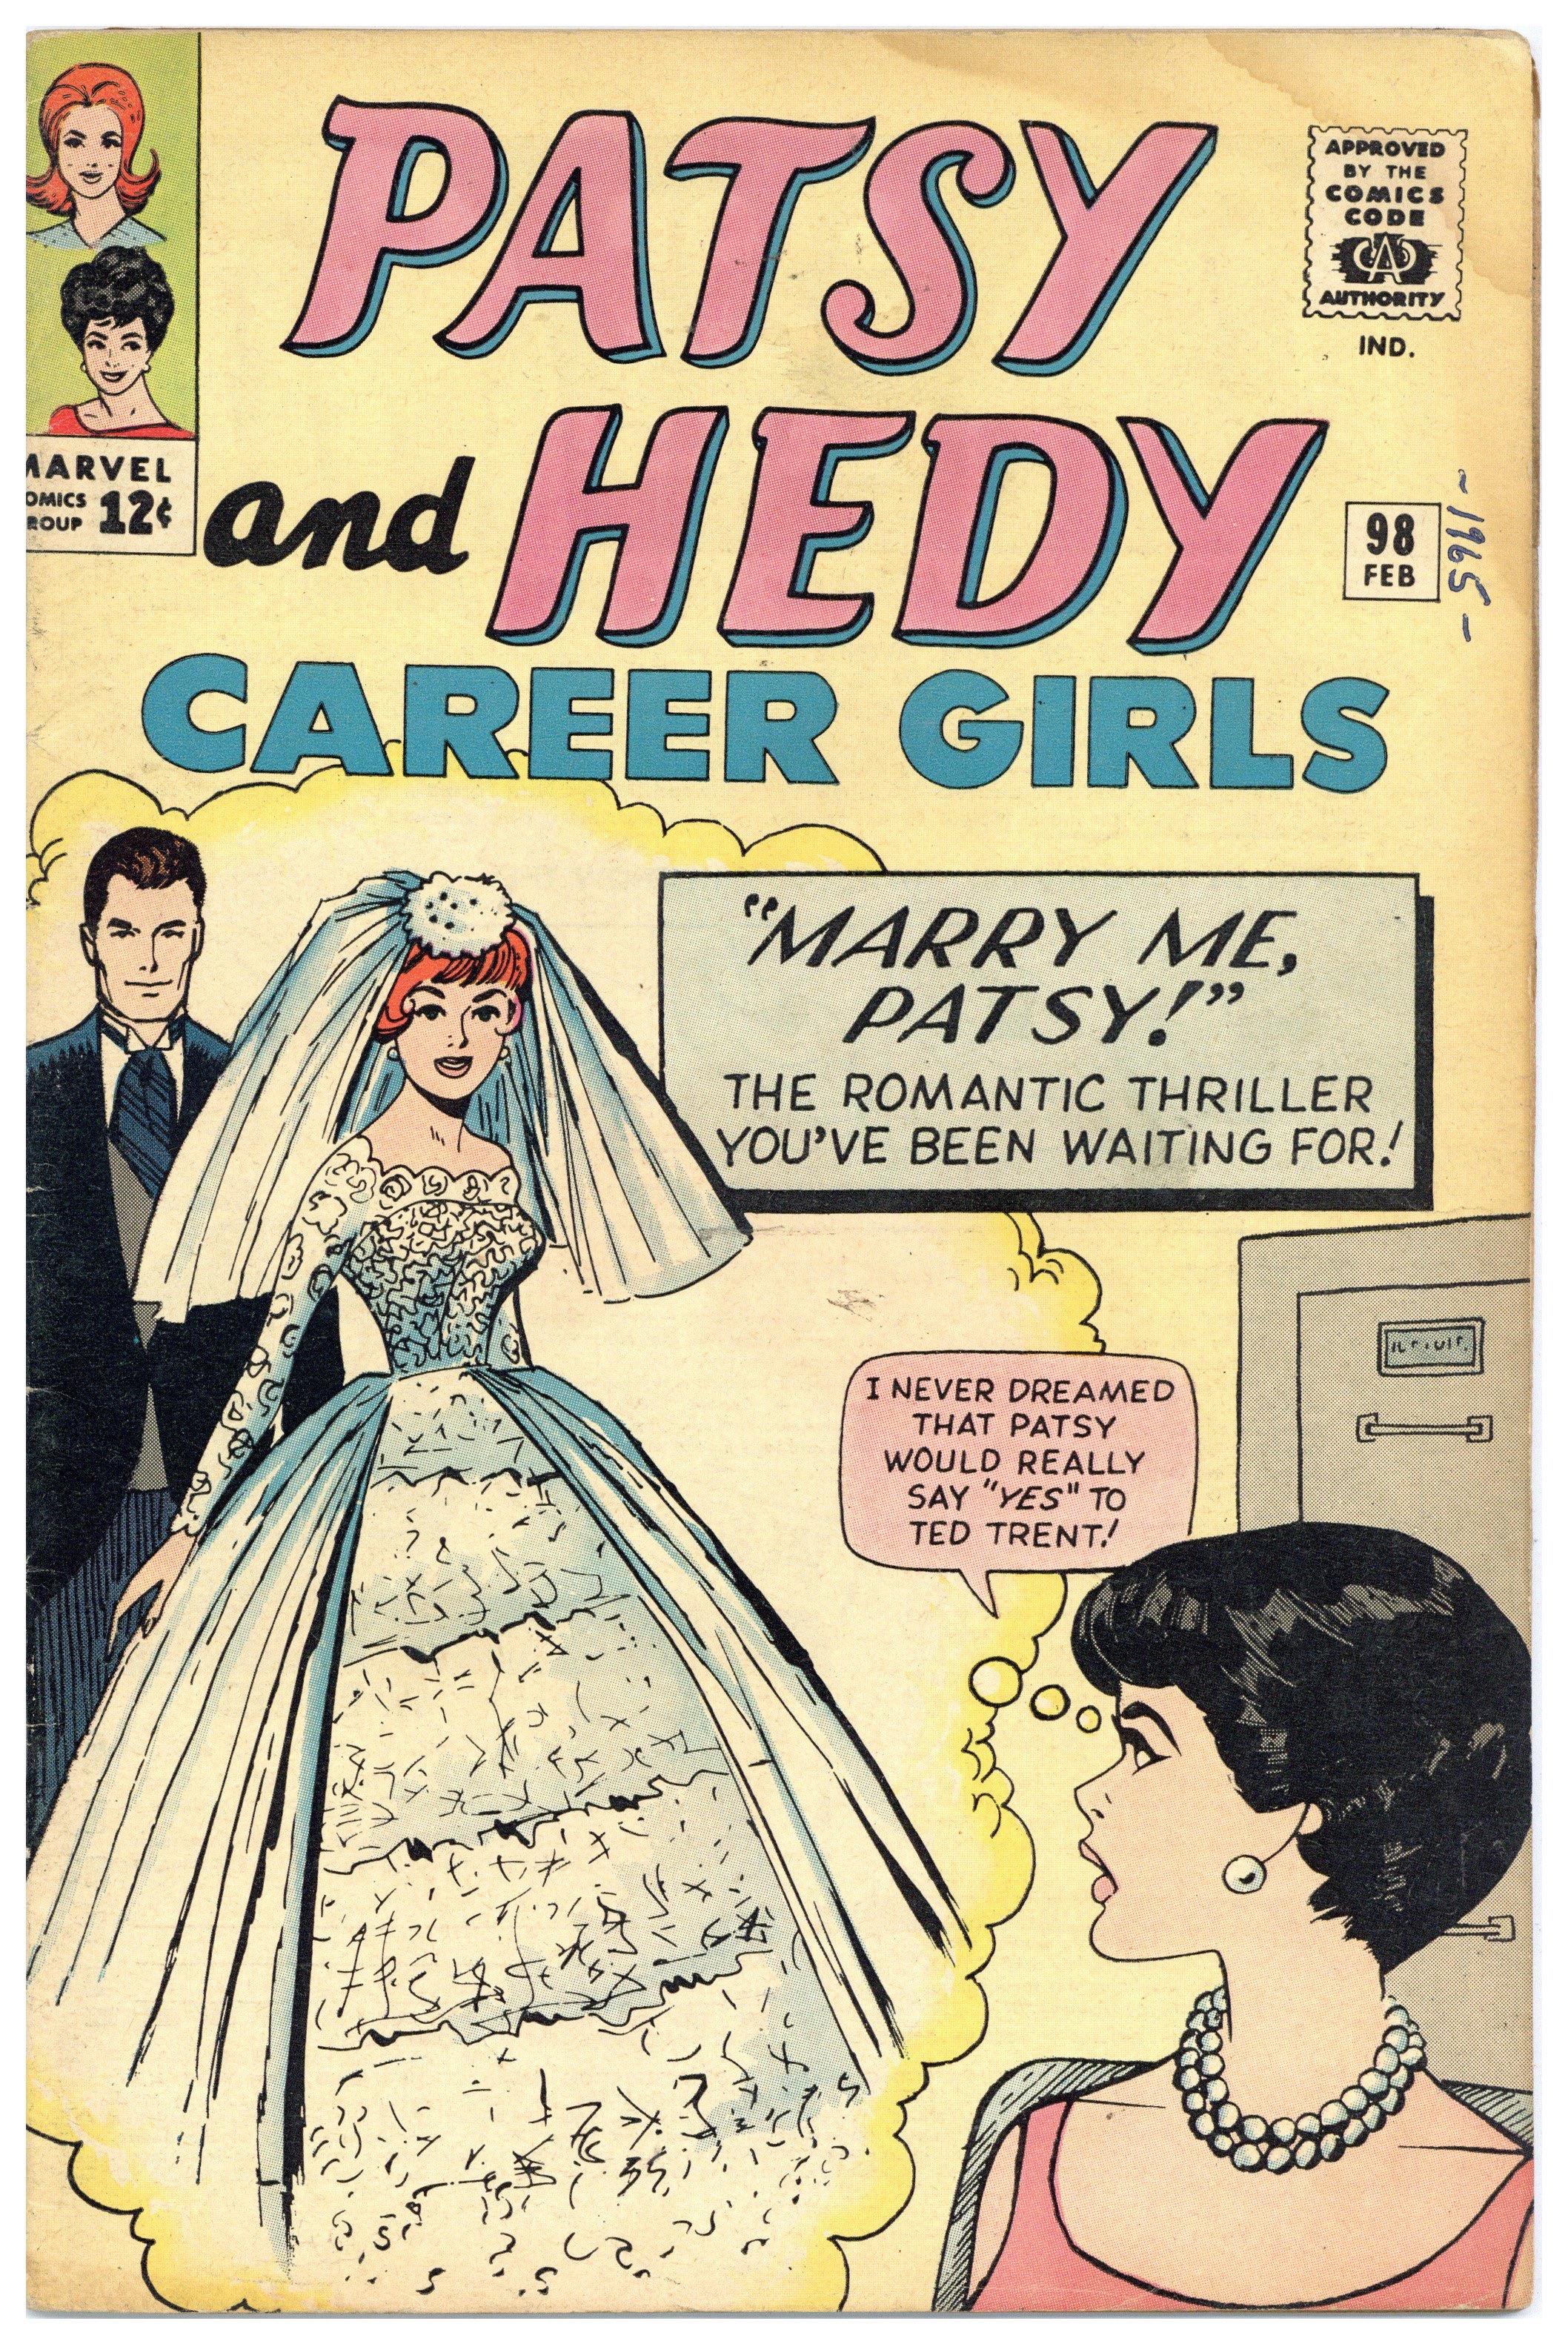 Patsy And Hedy - Primary